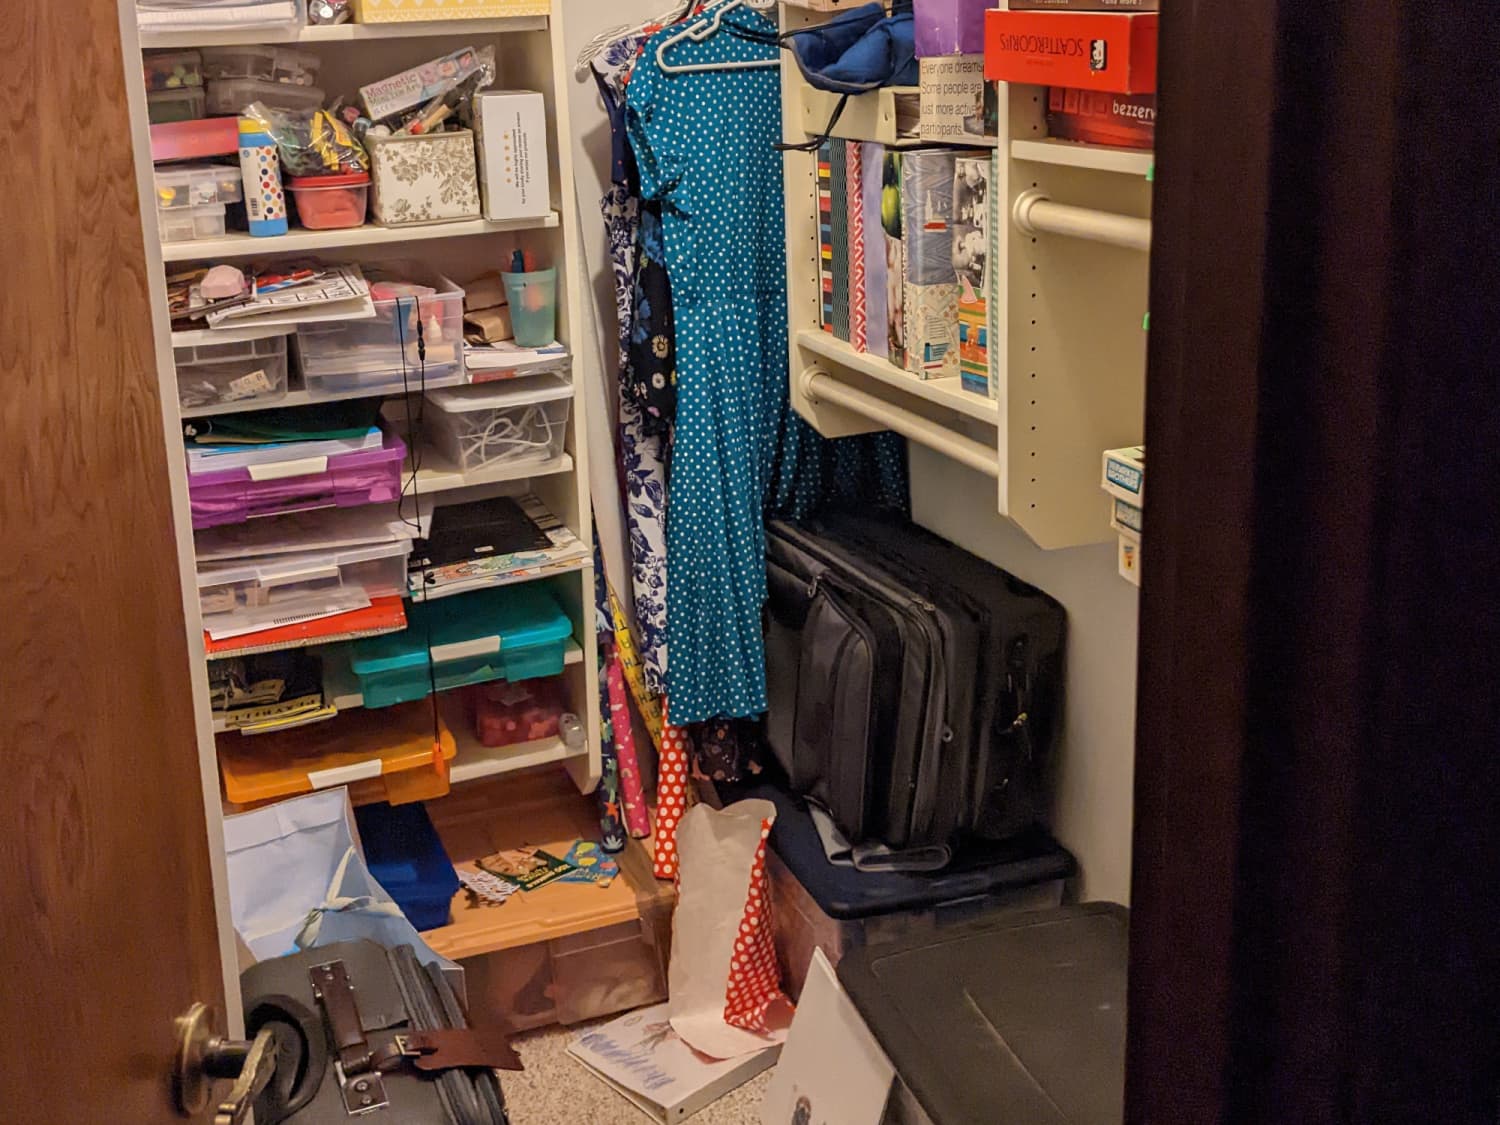 So satisfying getting my chaotic closet organized after it has been a